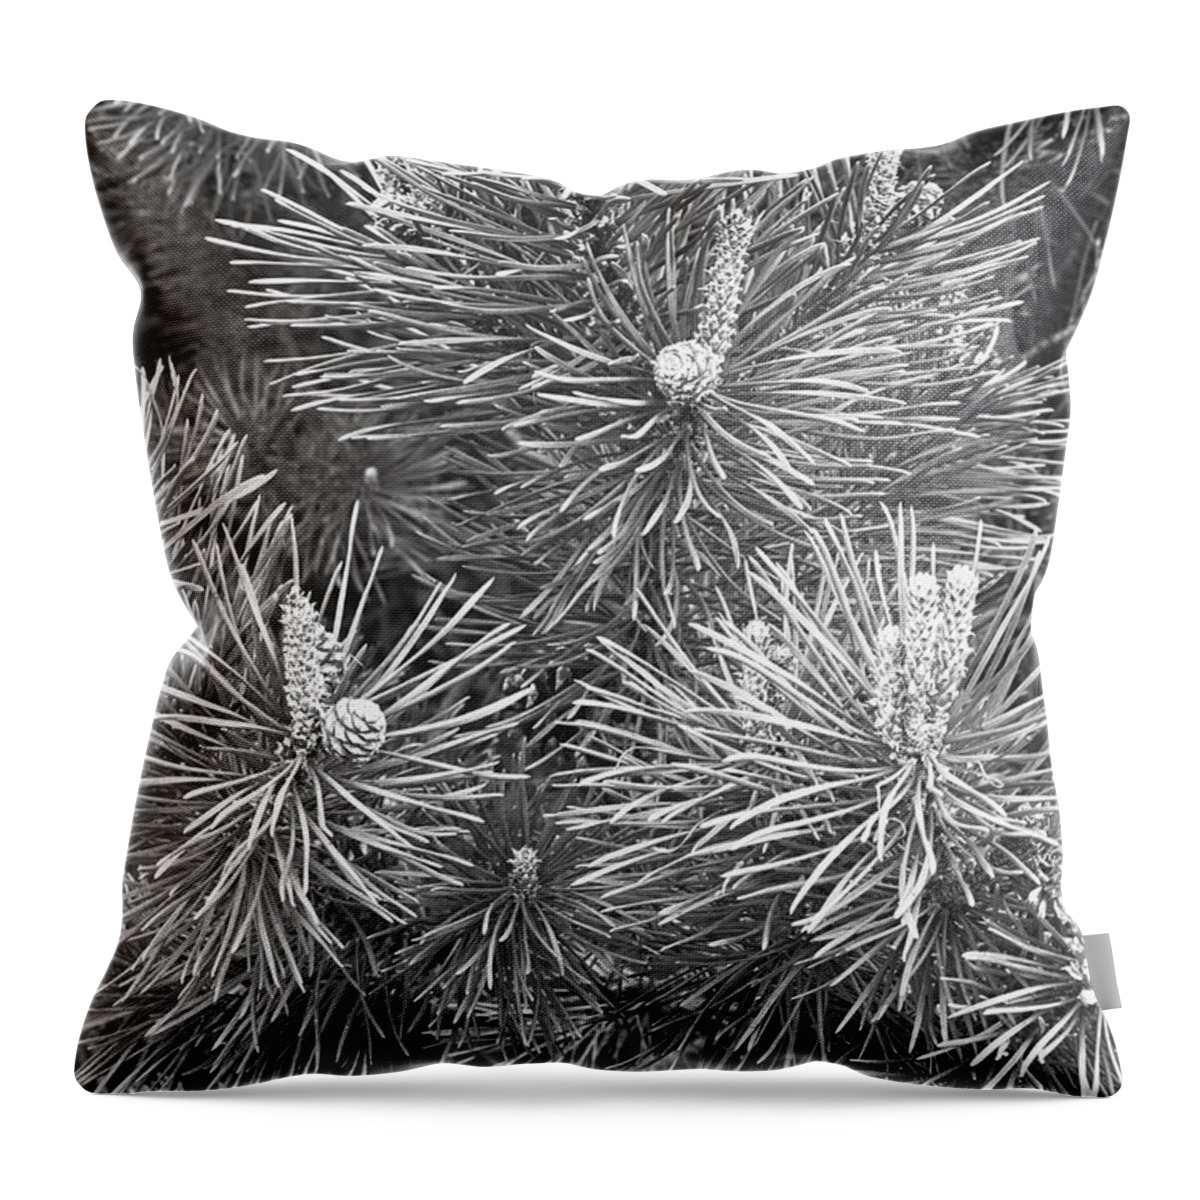 Needle Throw Pillow featuring the photograph Pine Cones And Needles, Close-up B&w by George Marks